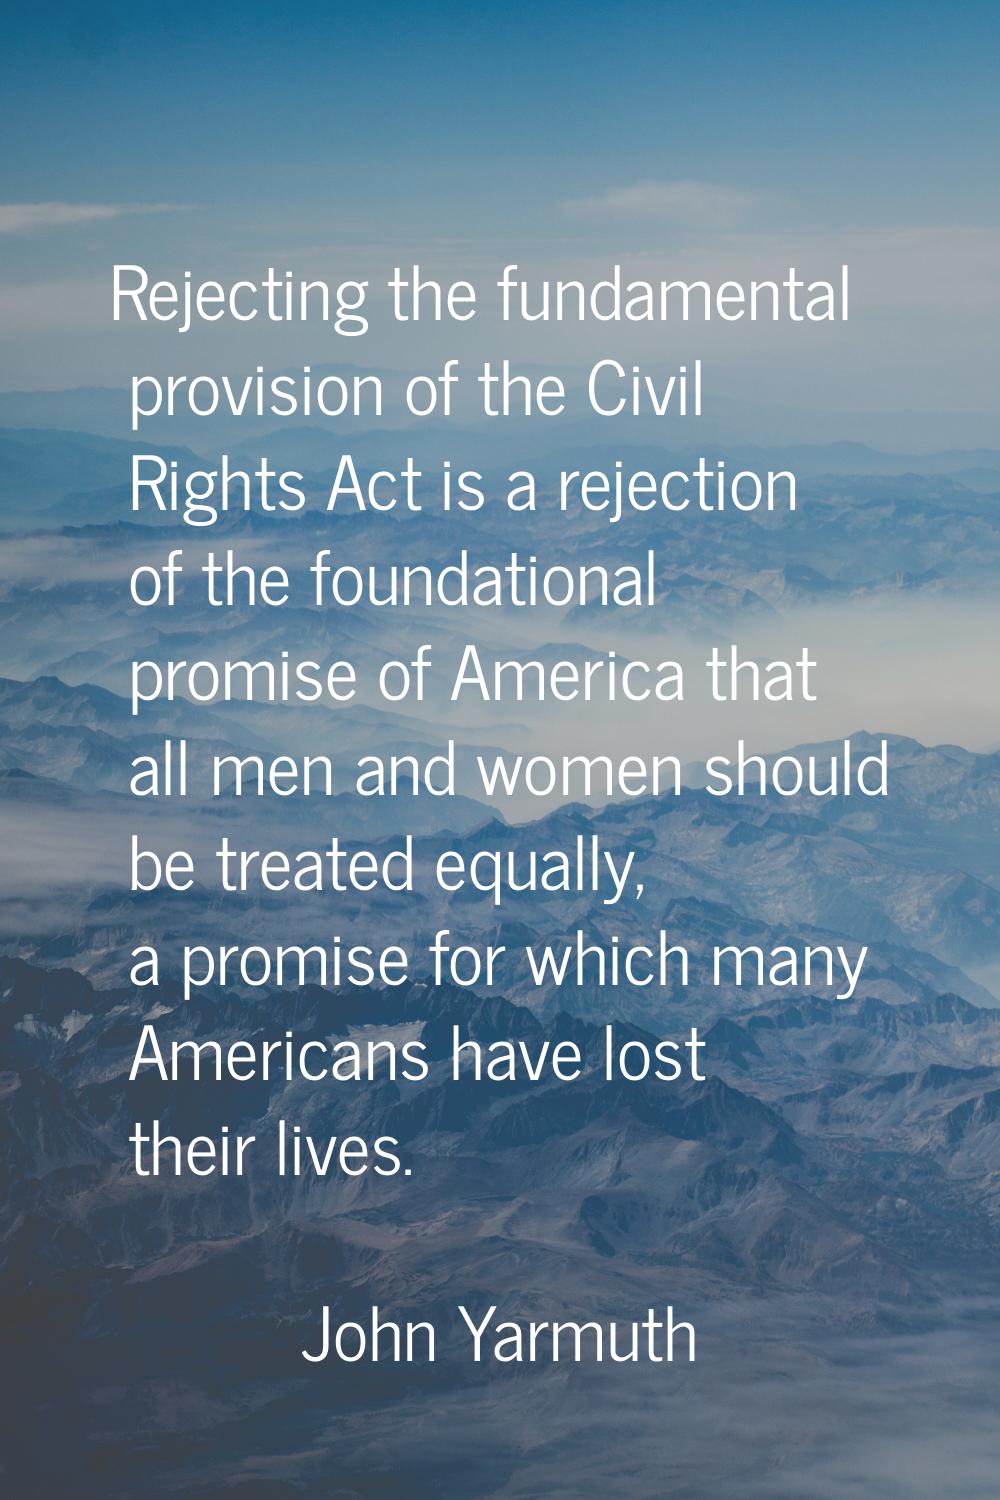 Rejecting the fundamental provision of the Civil Rights Act is a rejection of the foundational prom